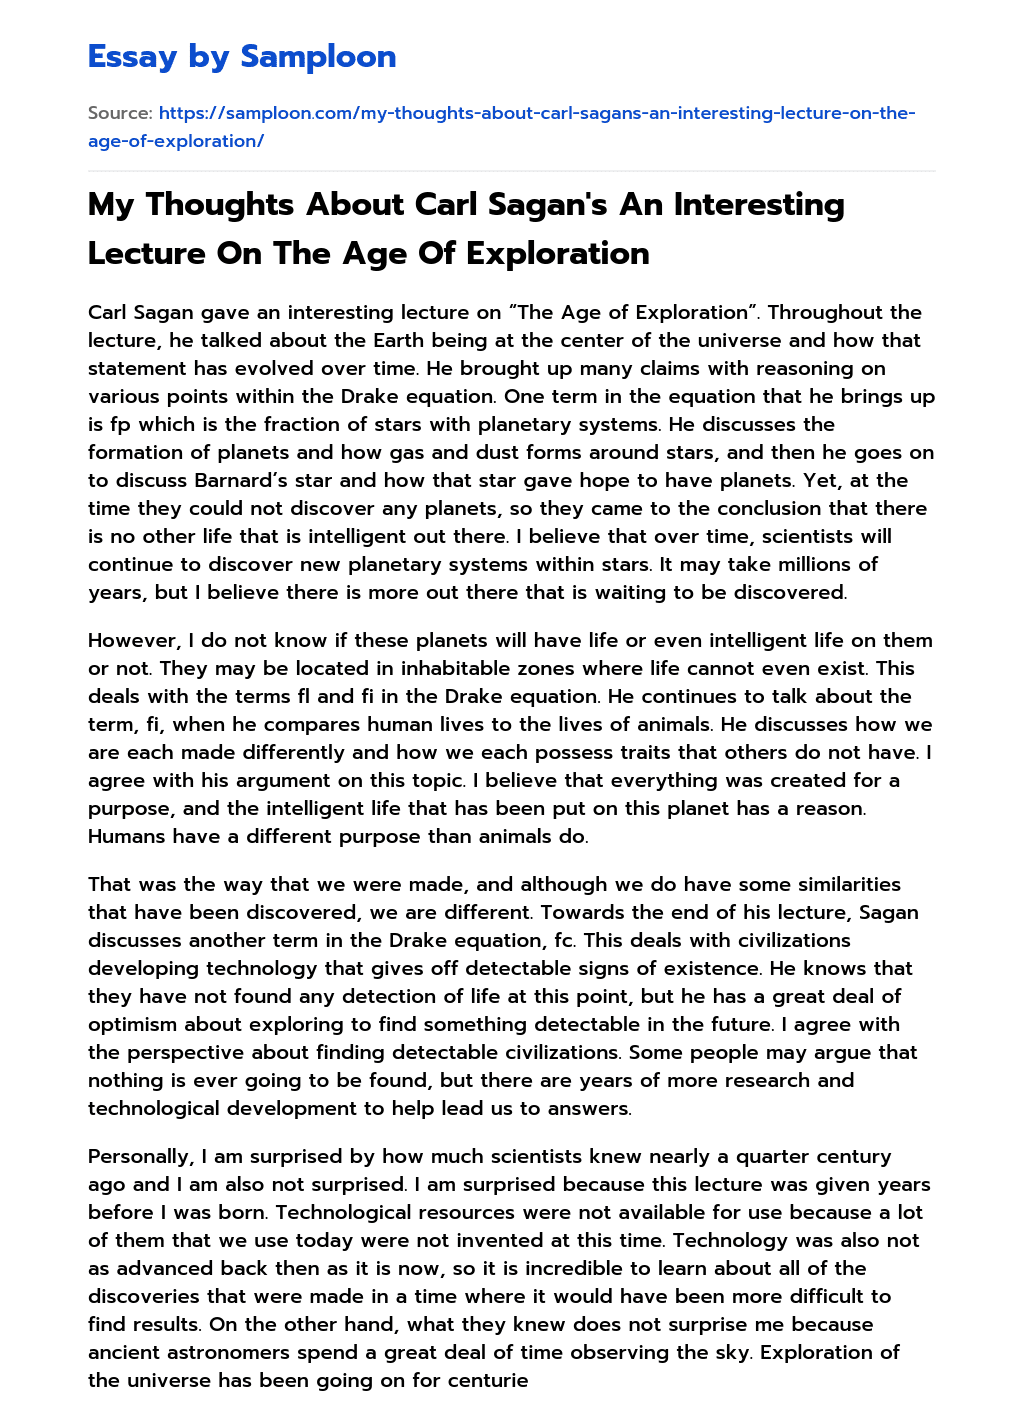 My Thoughts About Carl Sagan’s An Interesting Lecture On The Age Of Exploration essay